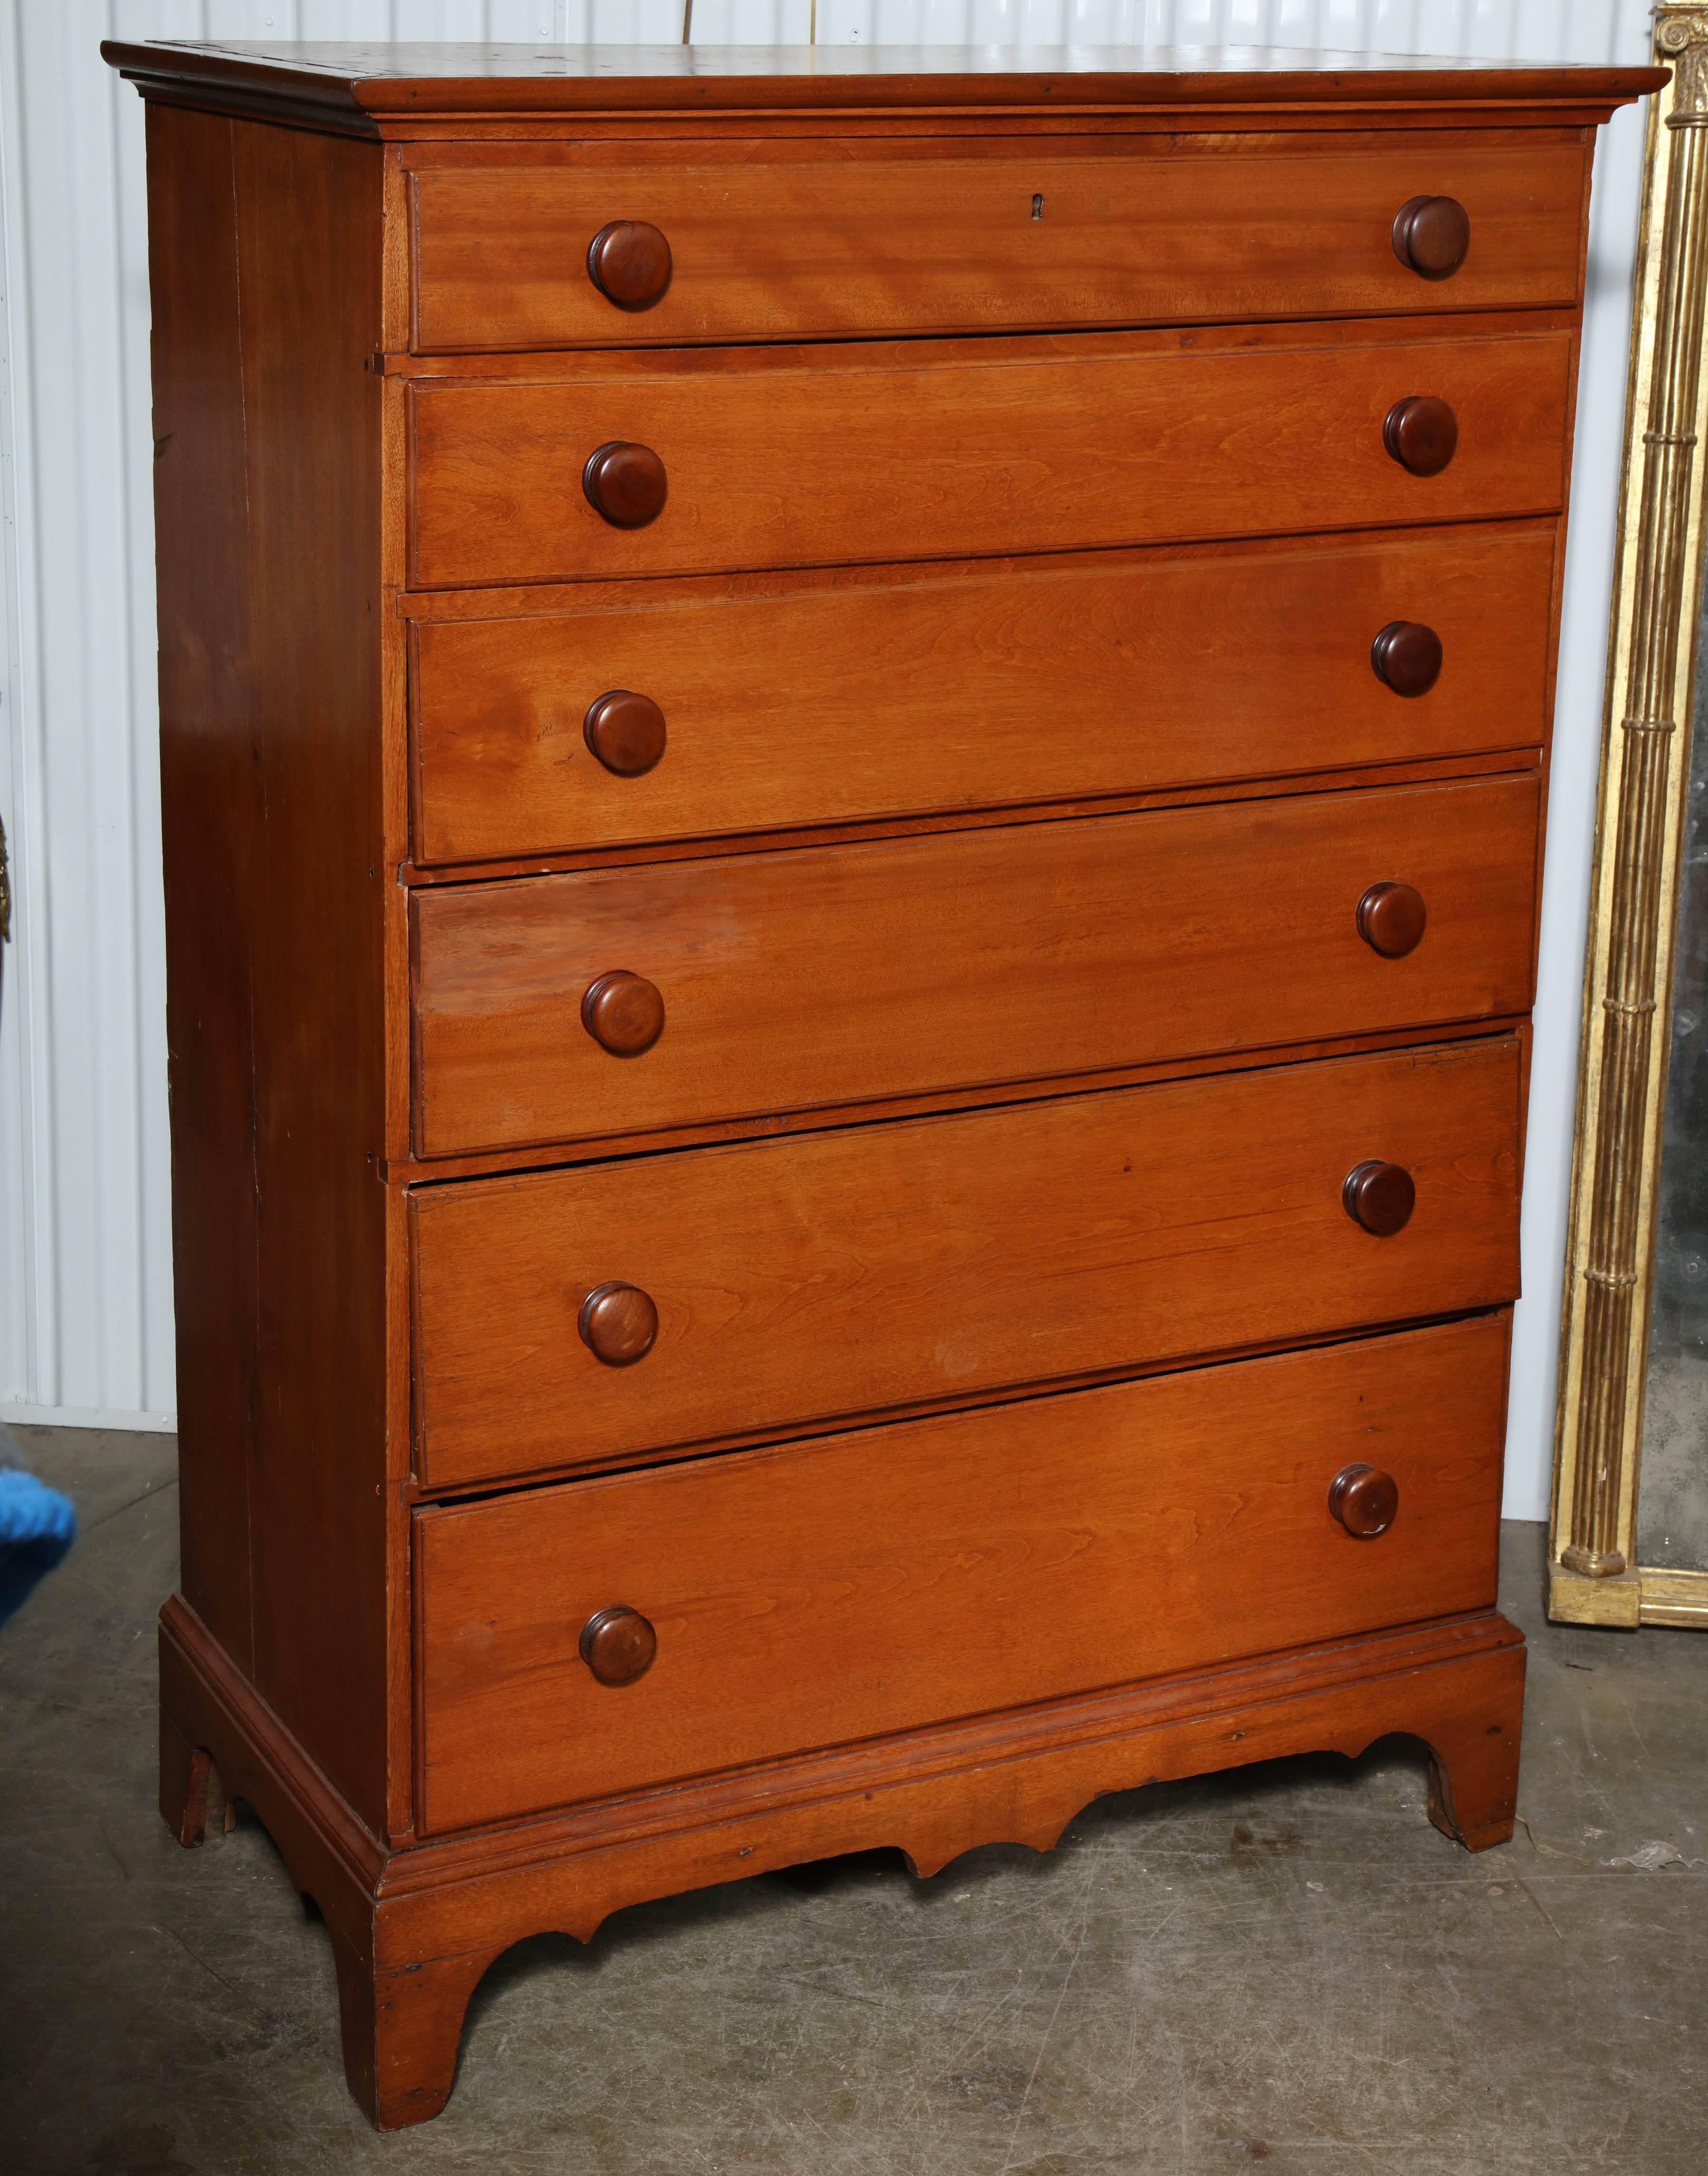 American New England six-drawer birch wood High Daddy tall chest of drawers with graduated drawers on a bracket feet with a pendant apron.